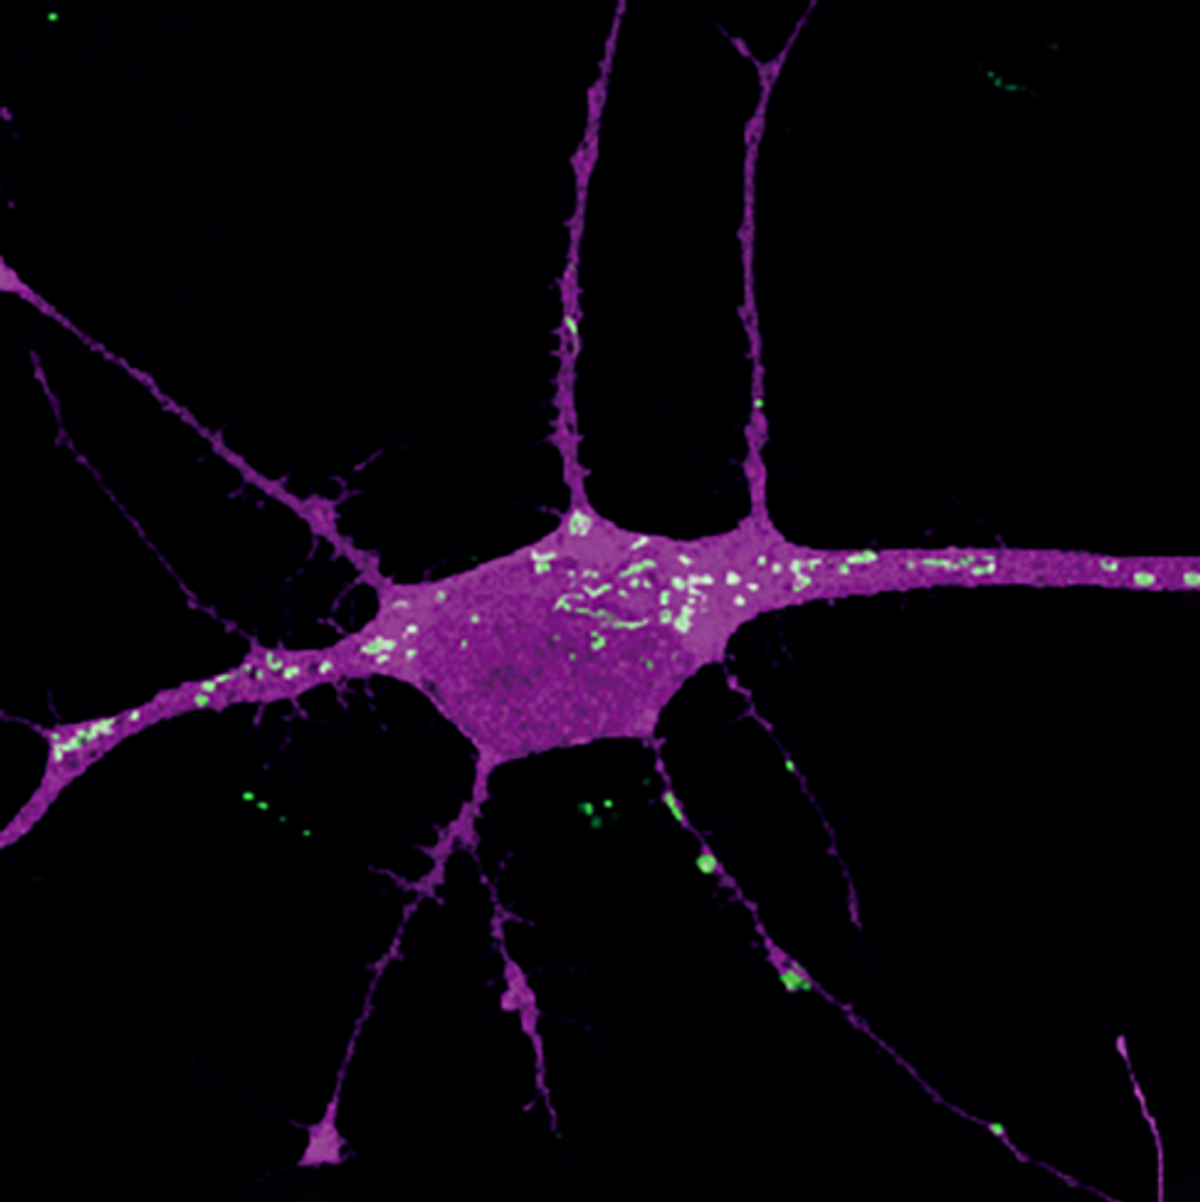 A purple human neuron with white mitochondria dotting the surface